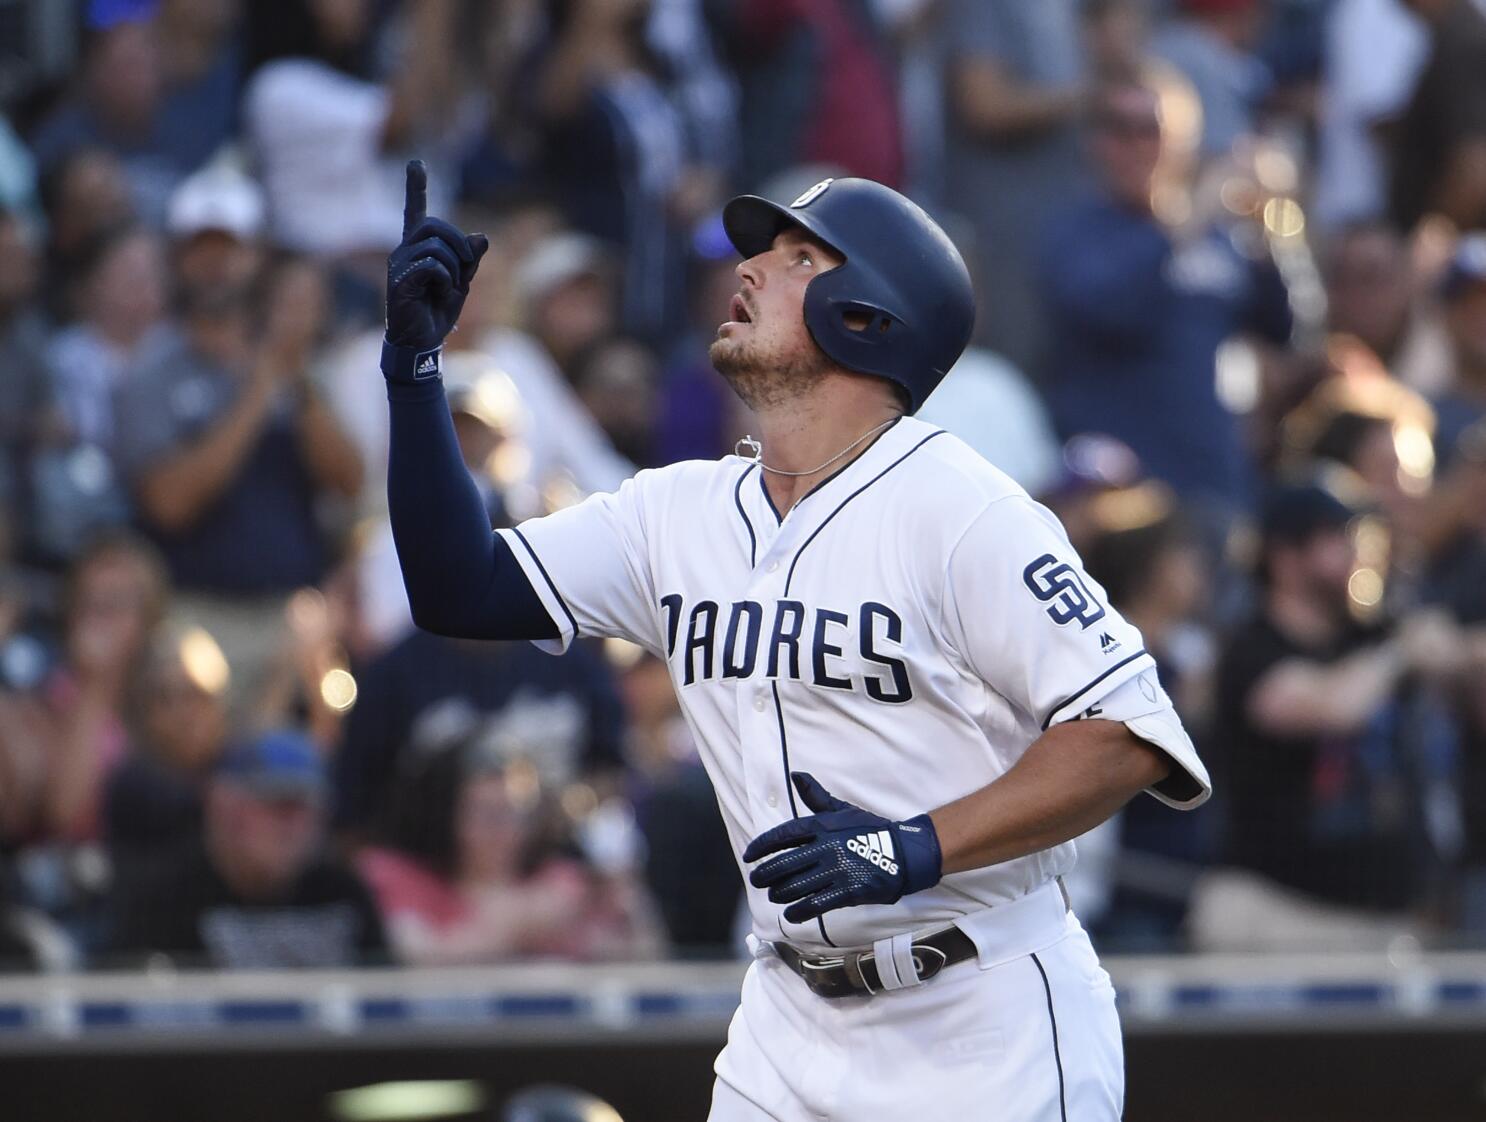 Padres' Hunter Renfroe expects to play on upcoming trip against Rockies,  Brewers - The San Diego Union-Tribune